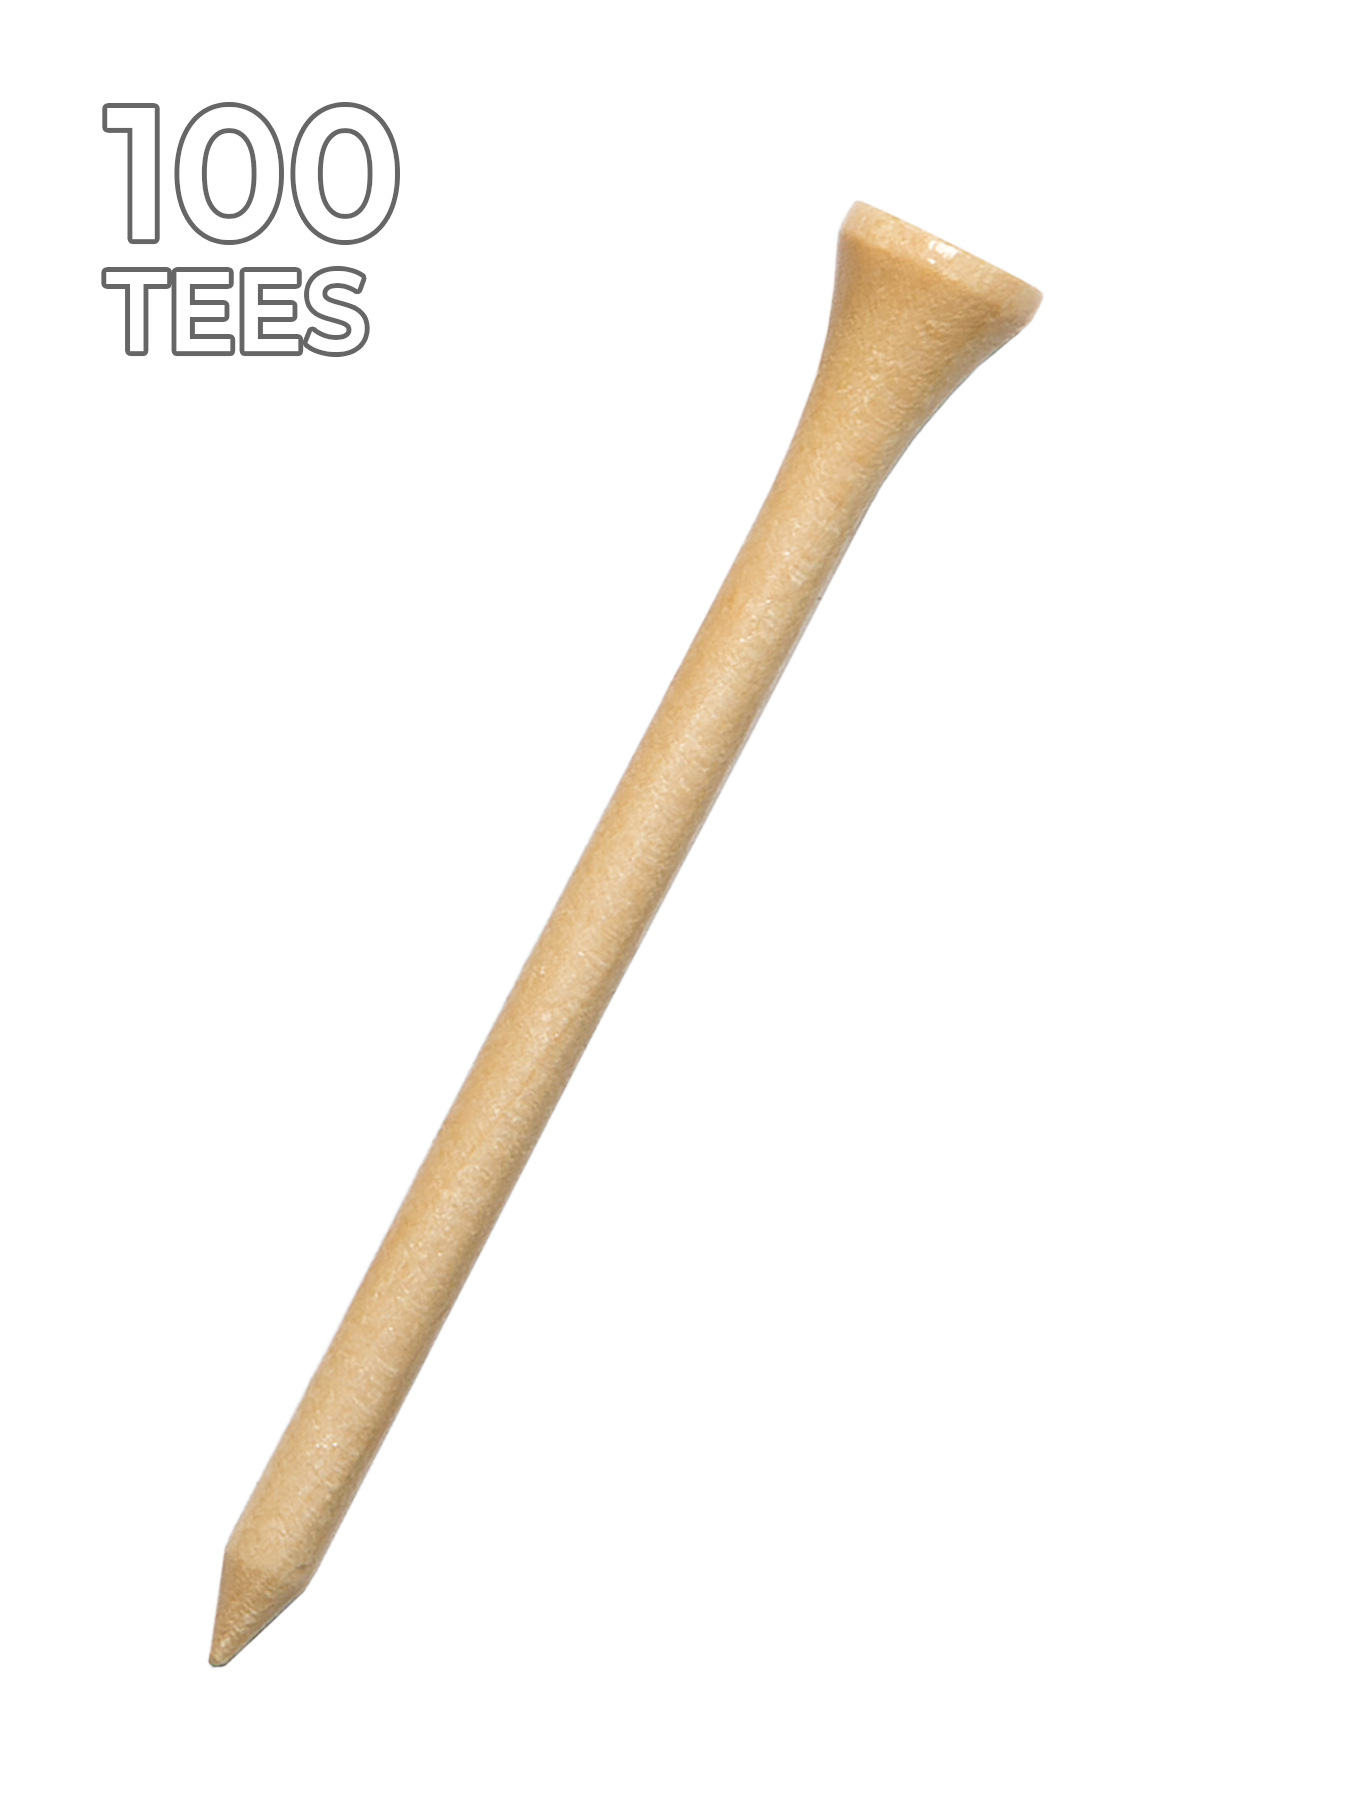 Pride Golf Tee, 2.75 inch, Natural, 100 Count - image 1 of 4